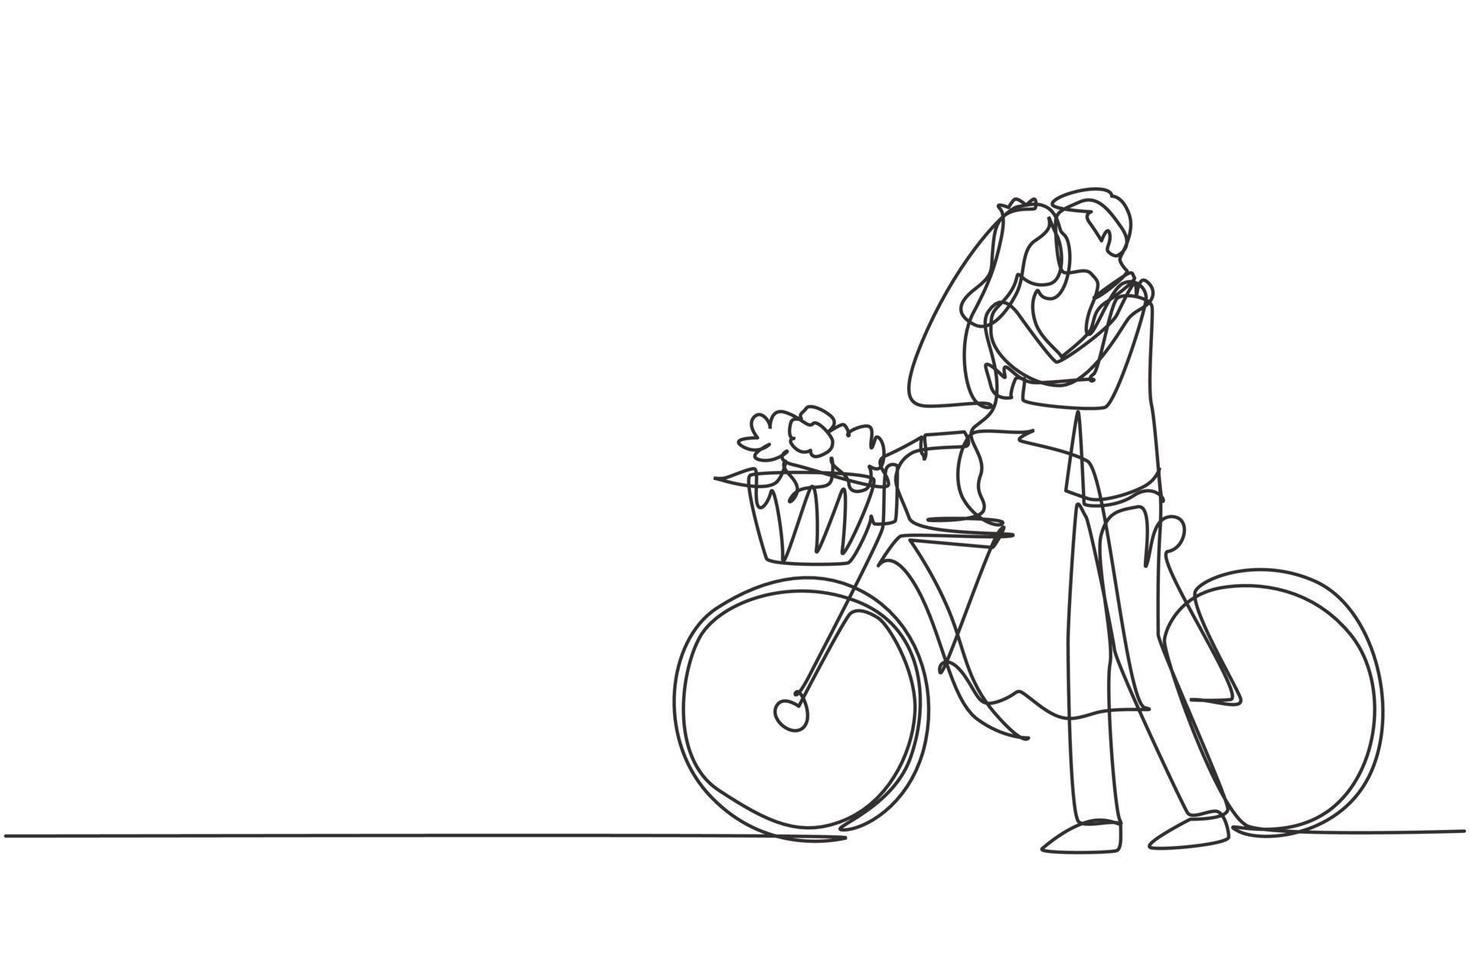 Single continuous line drawing loving married couple sitting on bicycle and kissing. Romantic human relation, love story, newlywed family in honeymoon. One line draw graphic design vector illustration